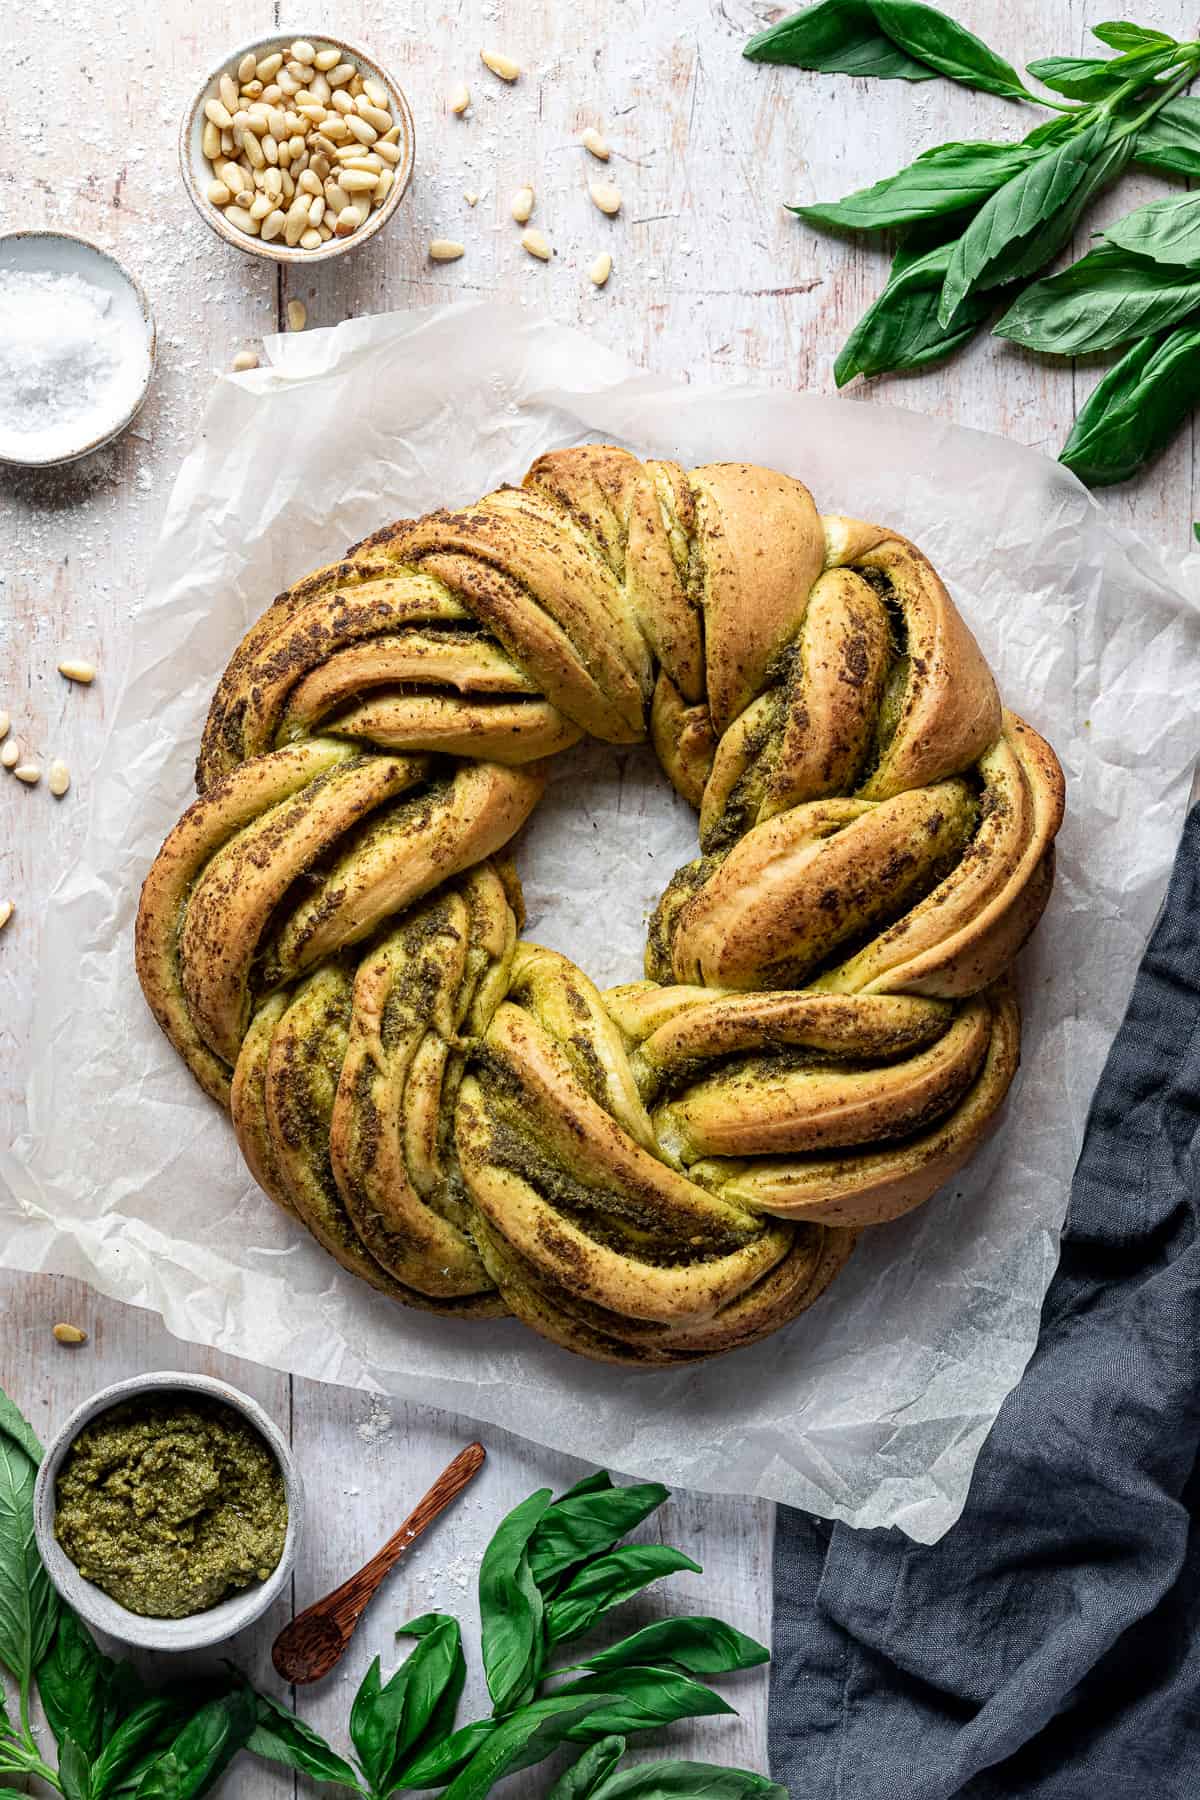 Vegan pesto bread wreath on a sheet of baking parchment on a wooden table surrounded by fresh basil and bowls of pine nuts, salt and pesto.